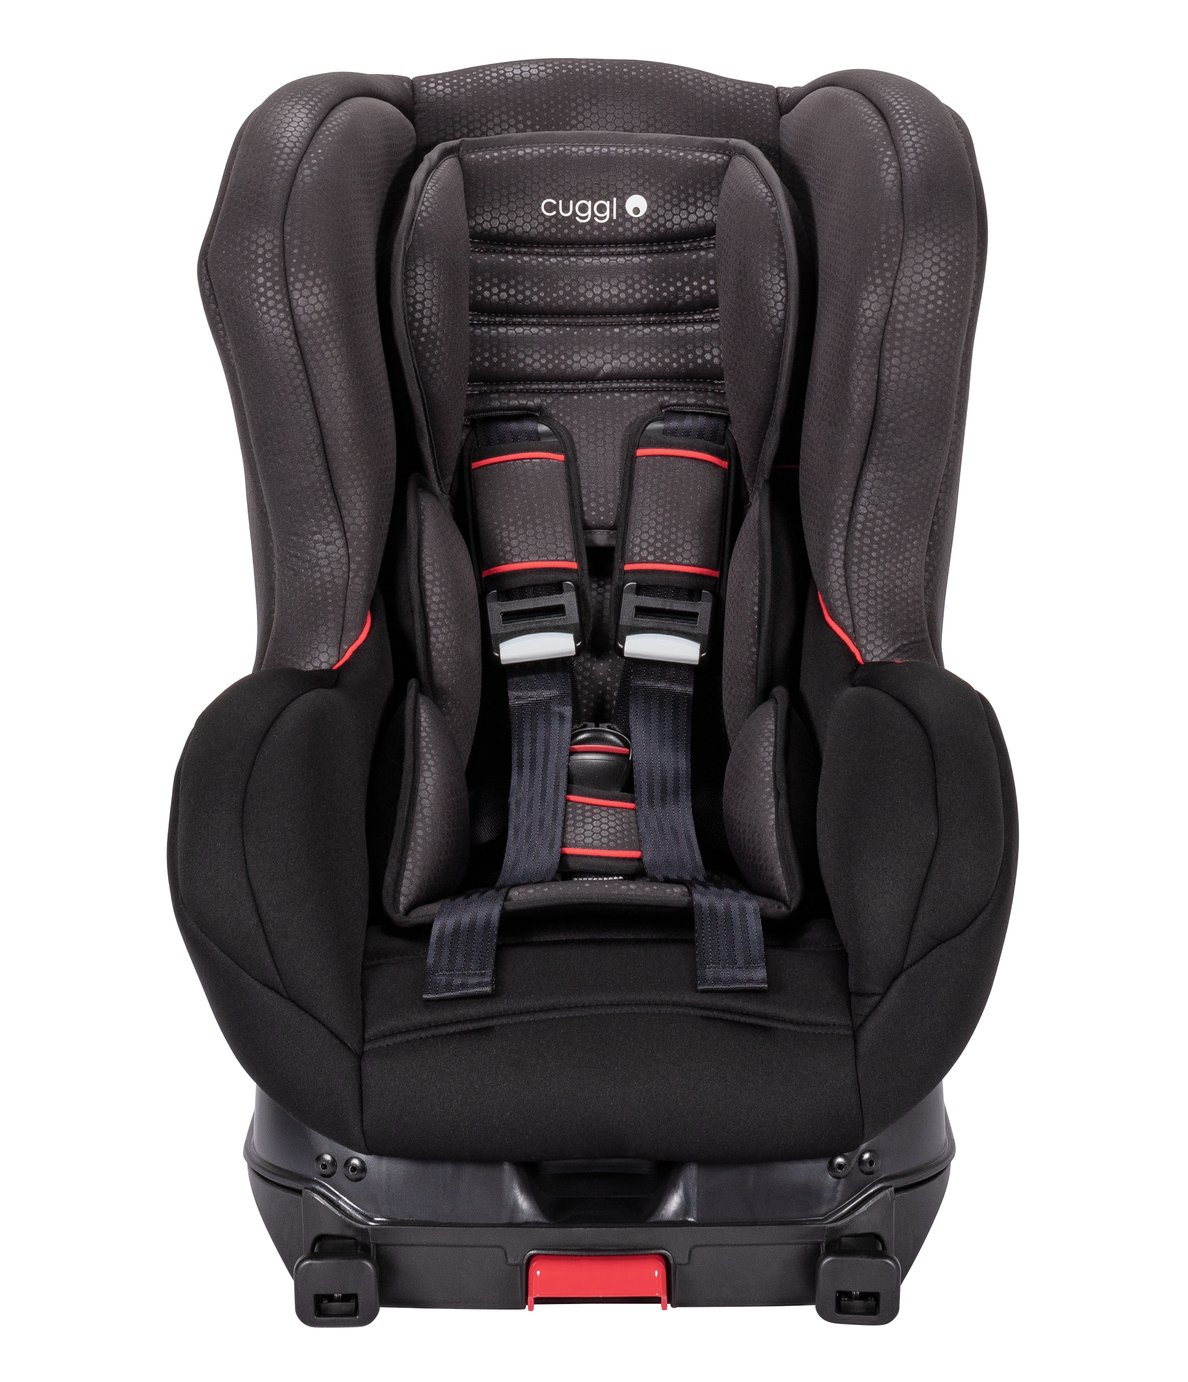 Cuggl Woodlark Group 0+/1 ISOFIX Car Seat Review